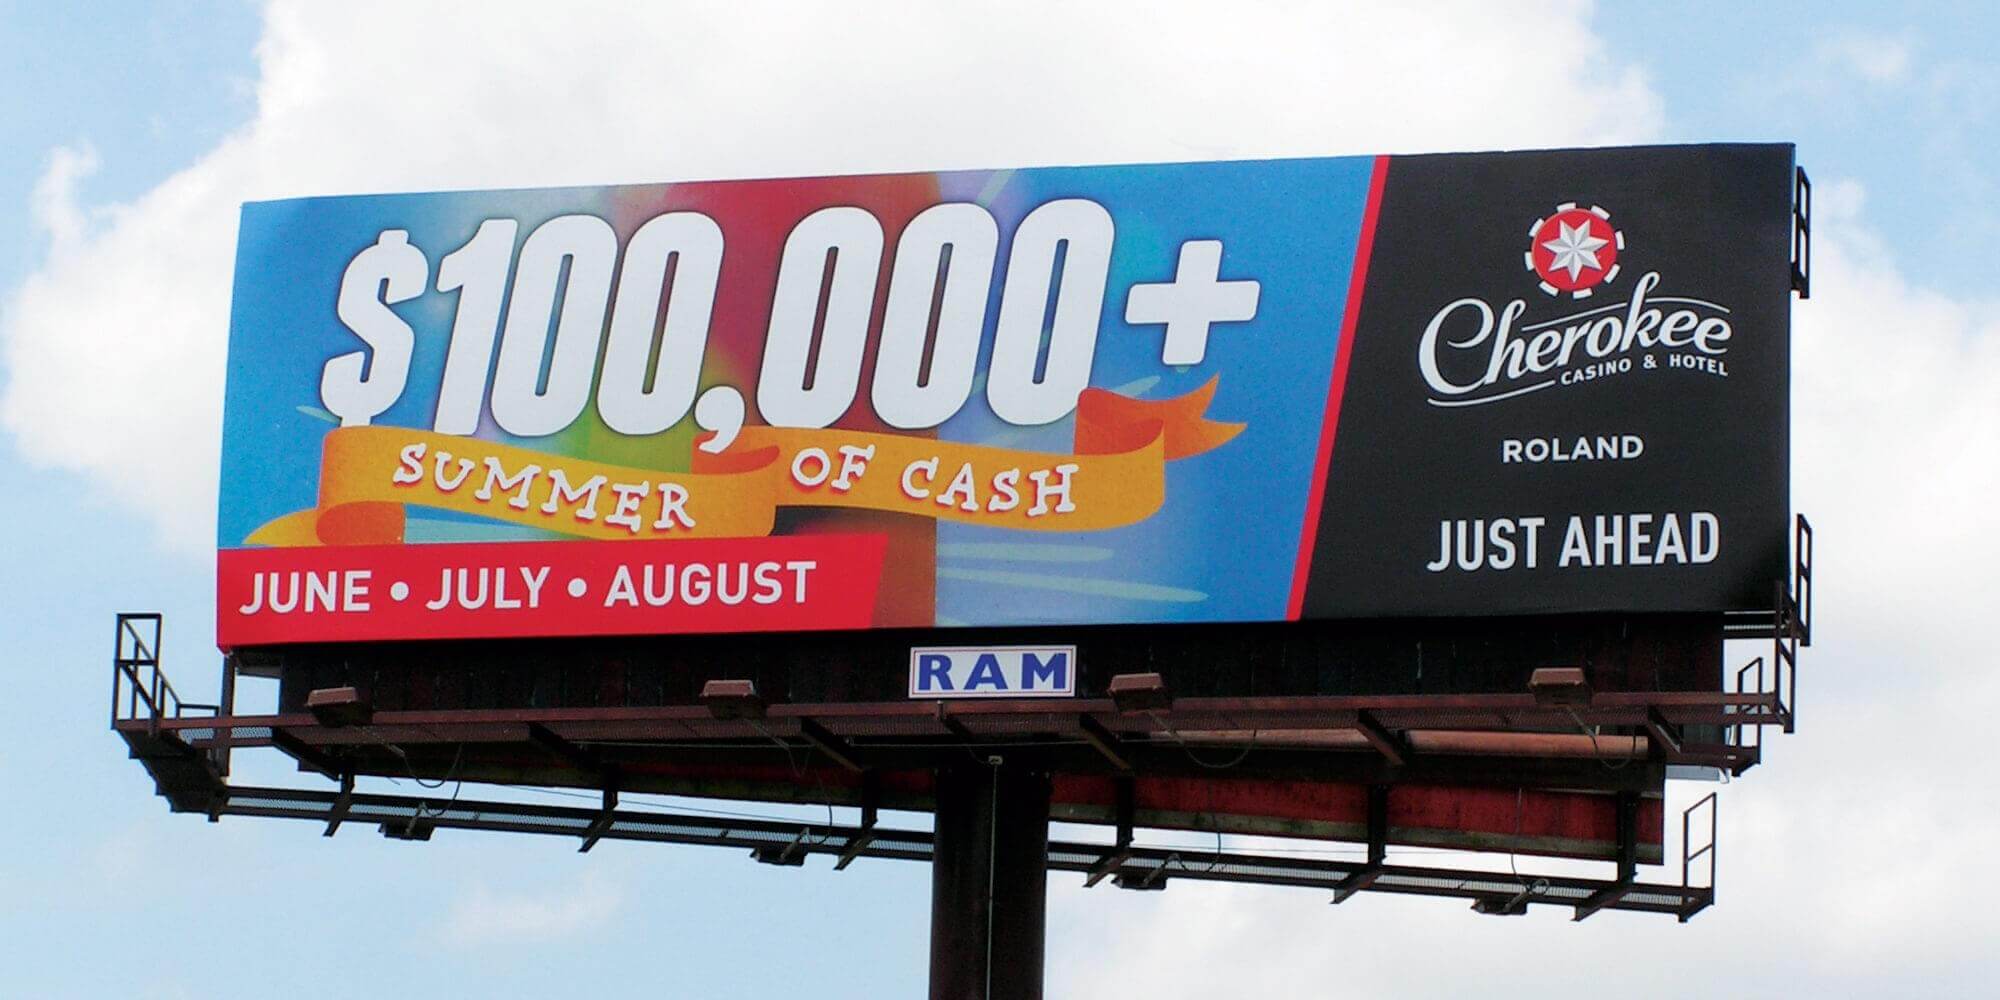 Image of OOH billboard advertising a summer campaign 